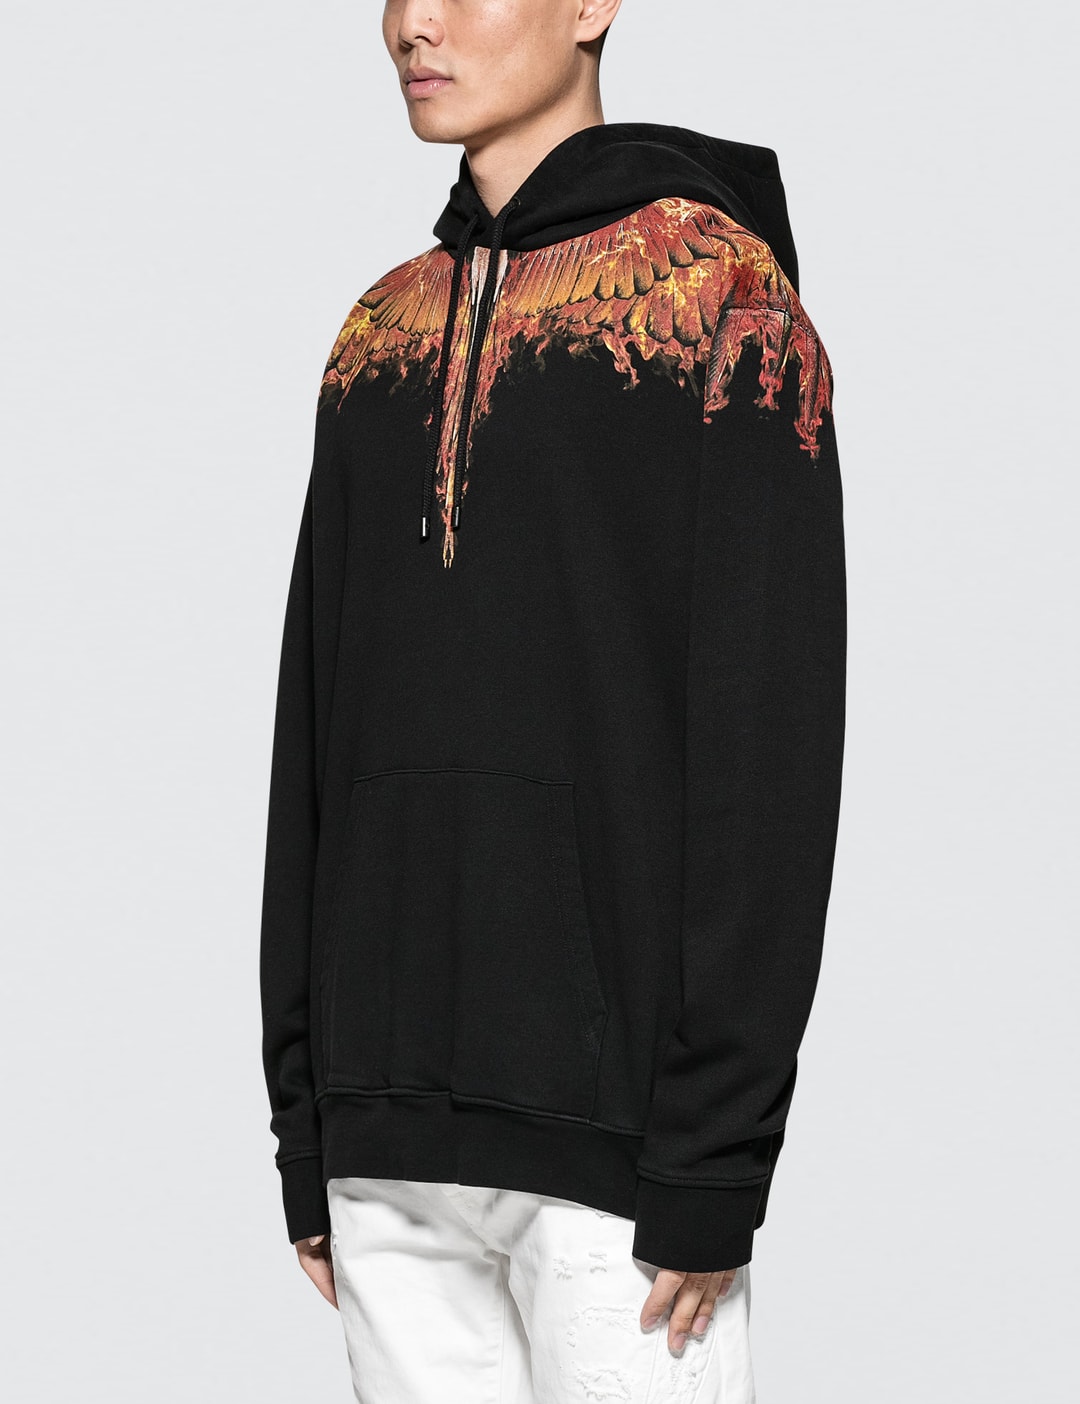 Burlon - Flame Hoodie | HBX - Globally Curated Fashion and Lifestyle Hypebeast